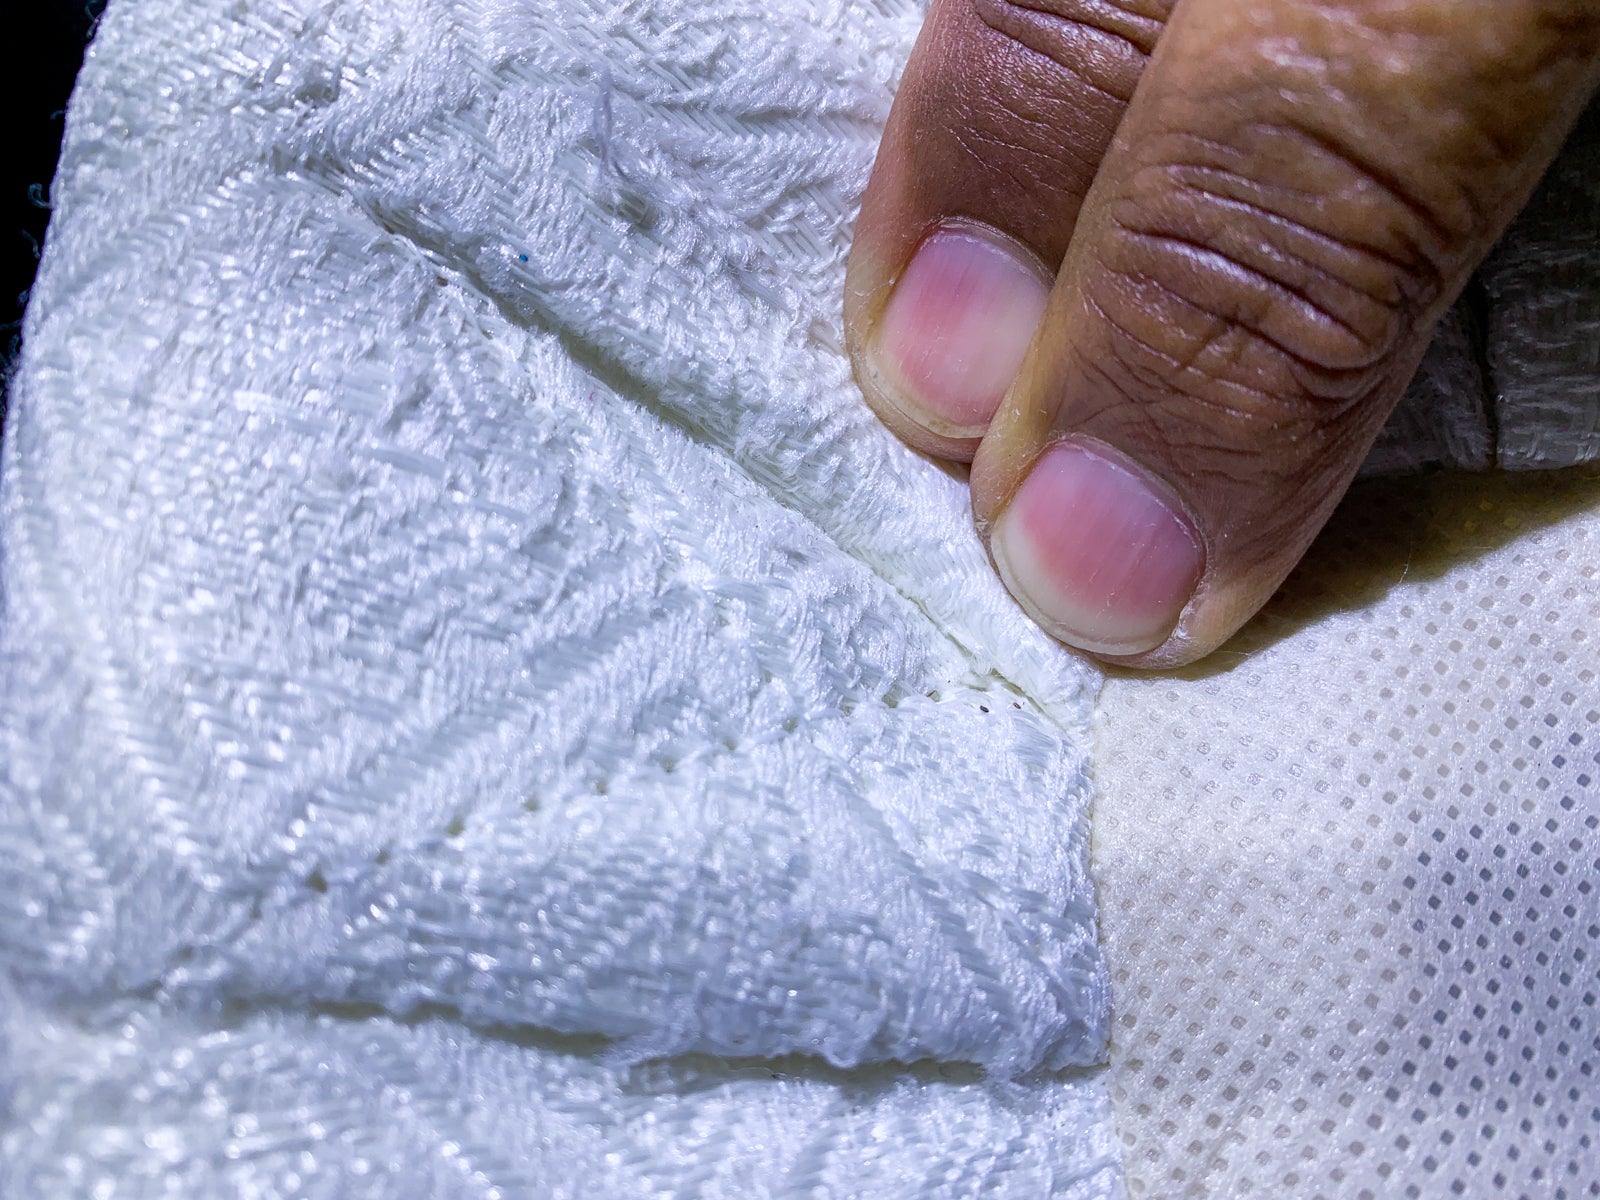 can bed bugs live on unused mattress